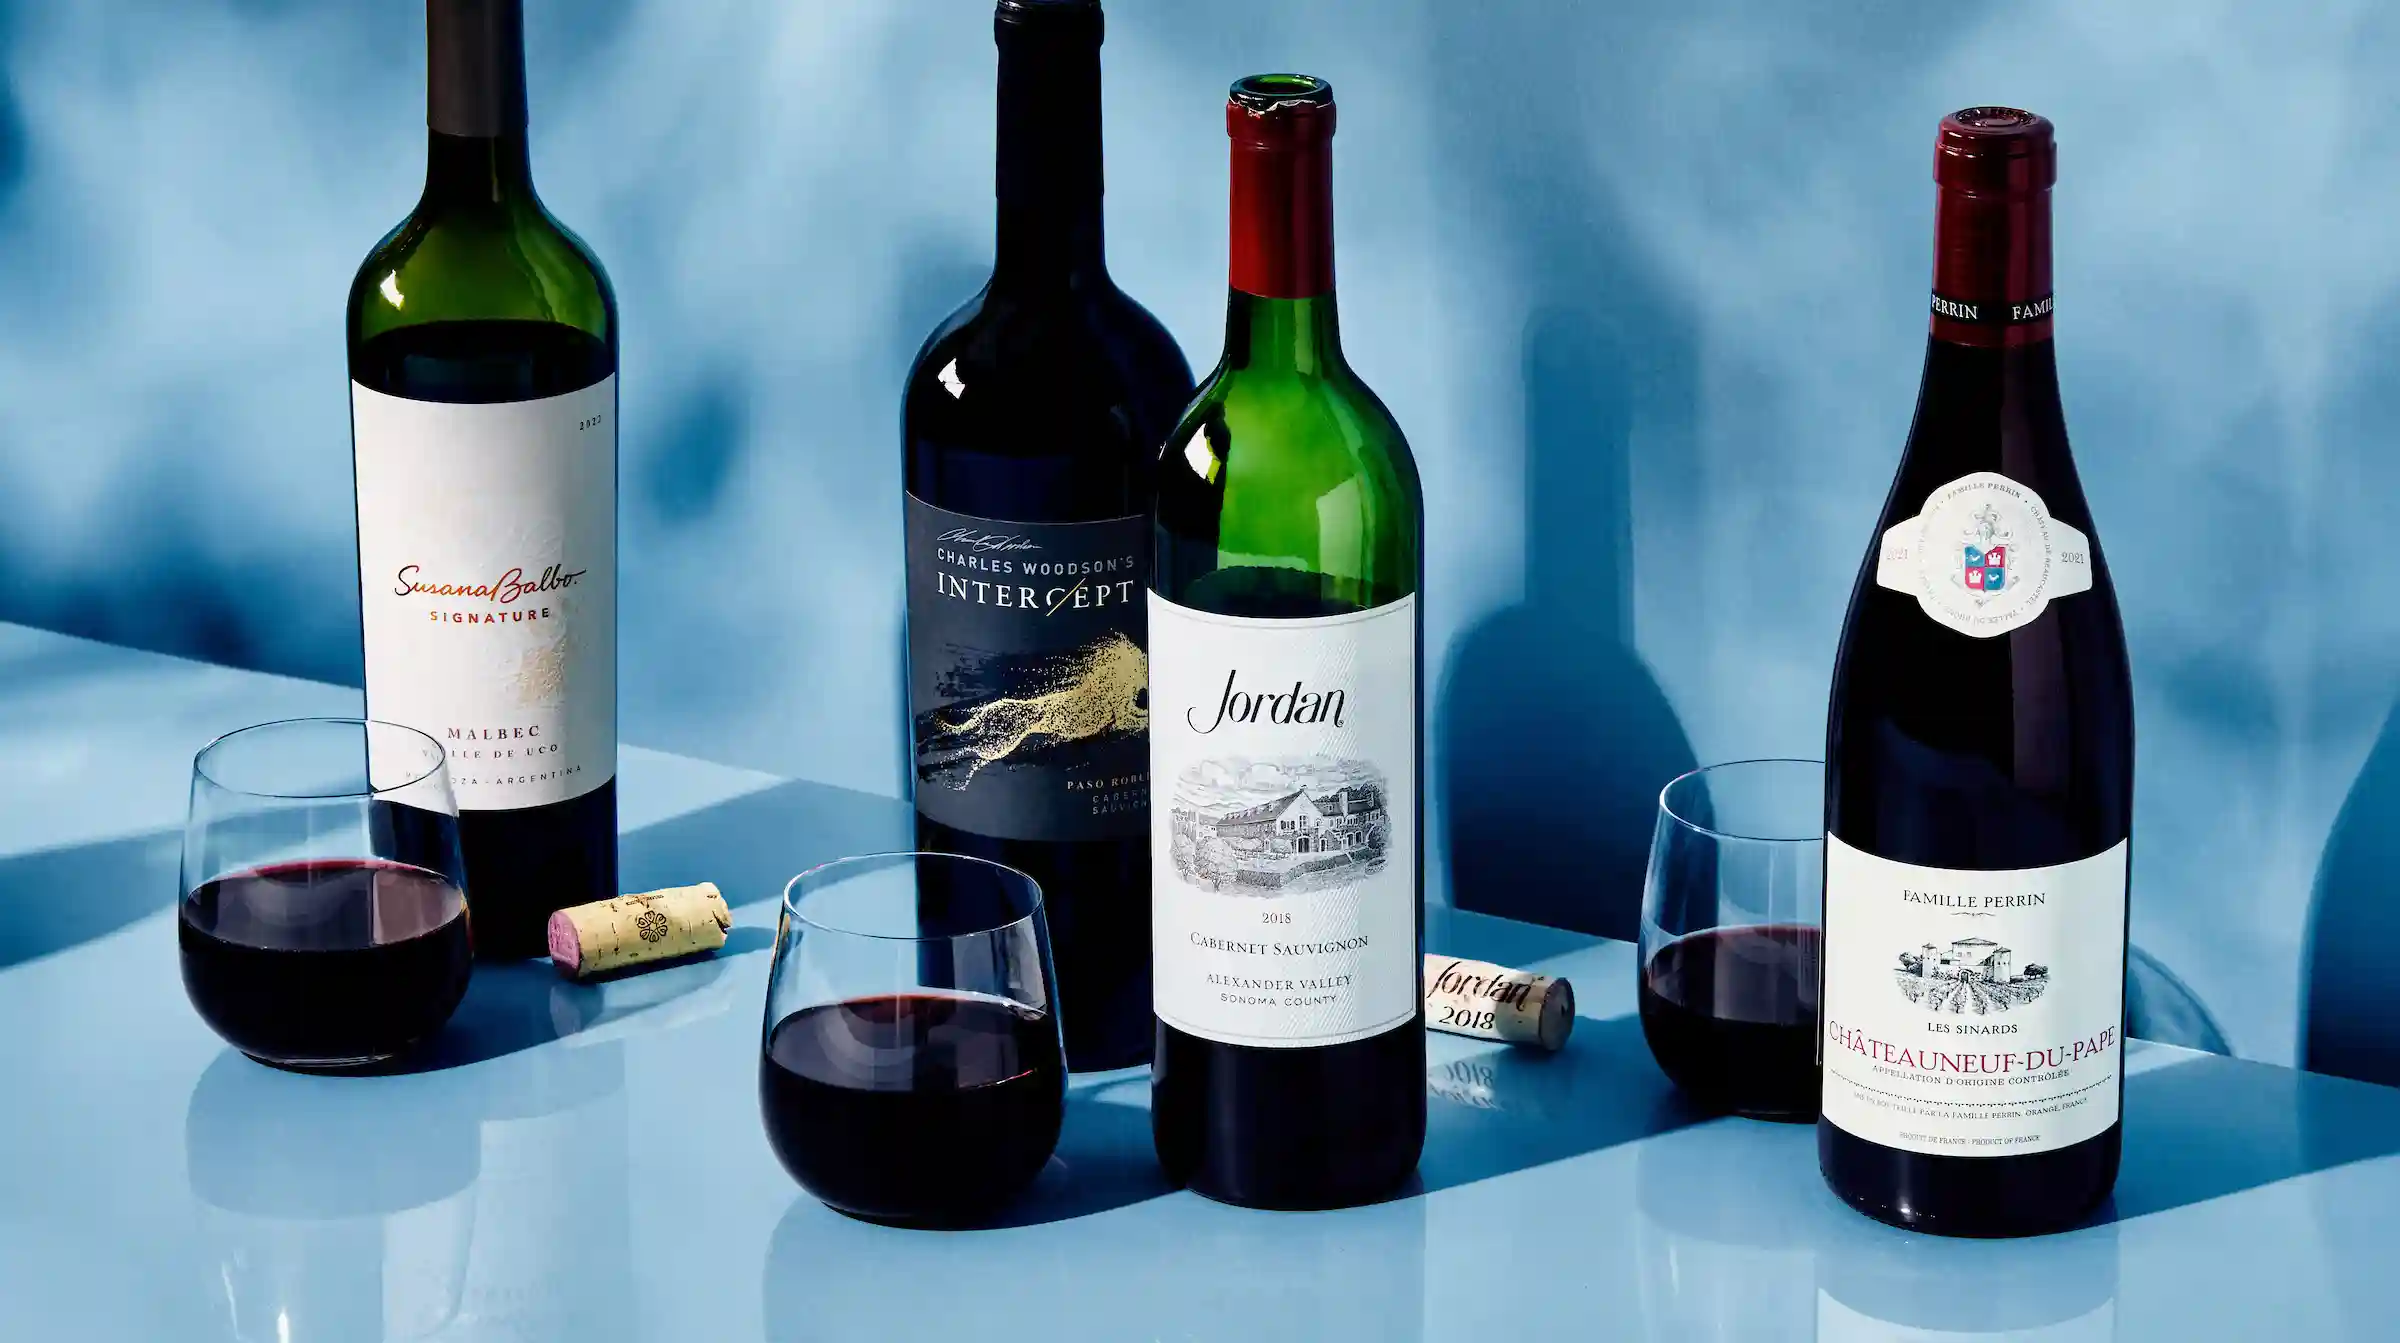 Delta Announces New Inflight Wines. Here’s What They Cost and When They’ll Be Available.